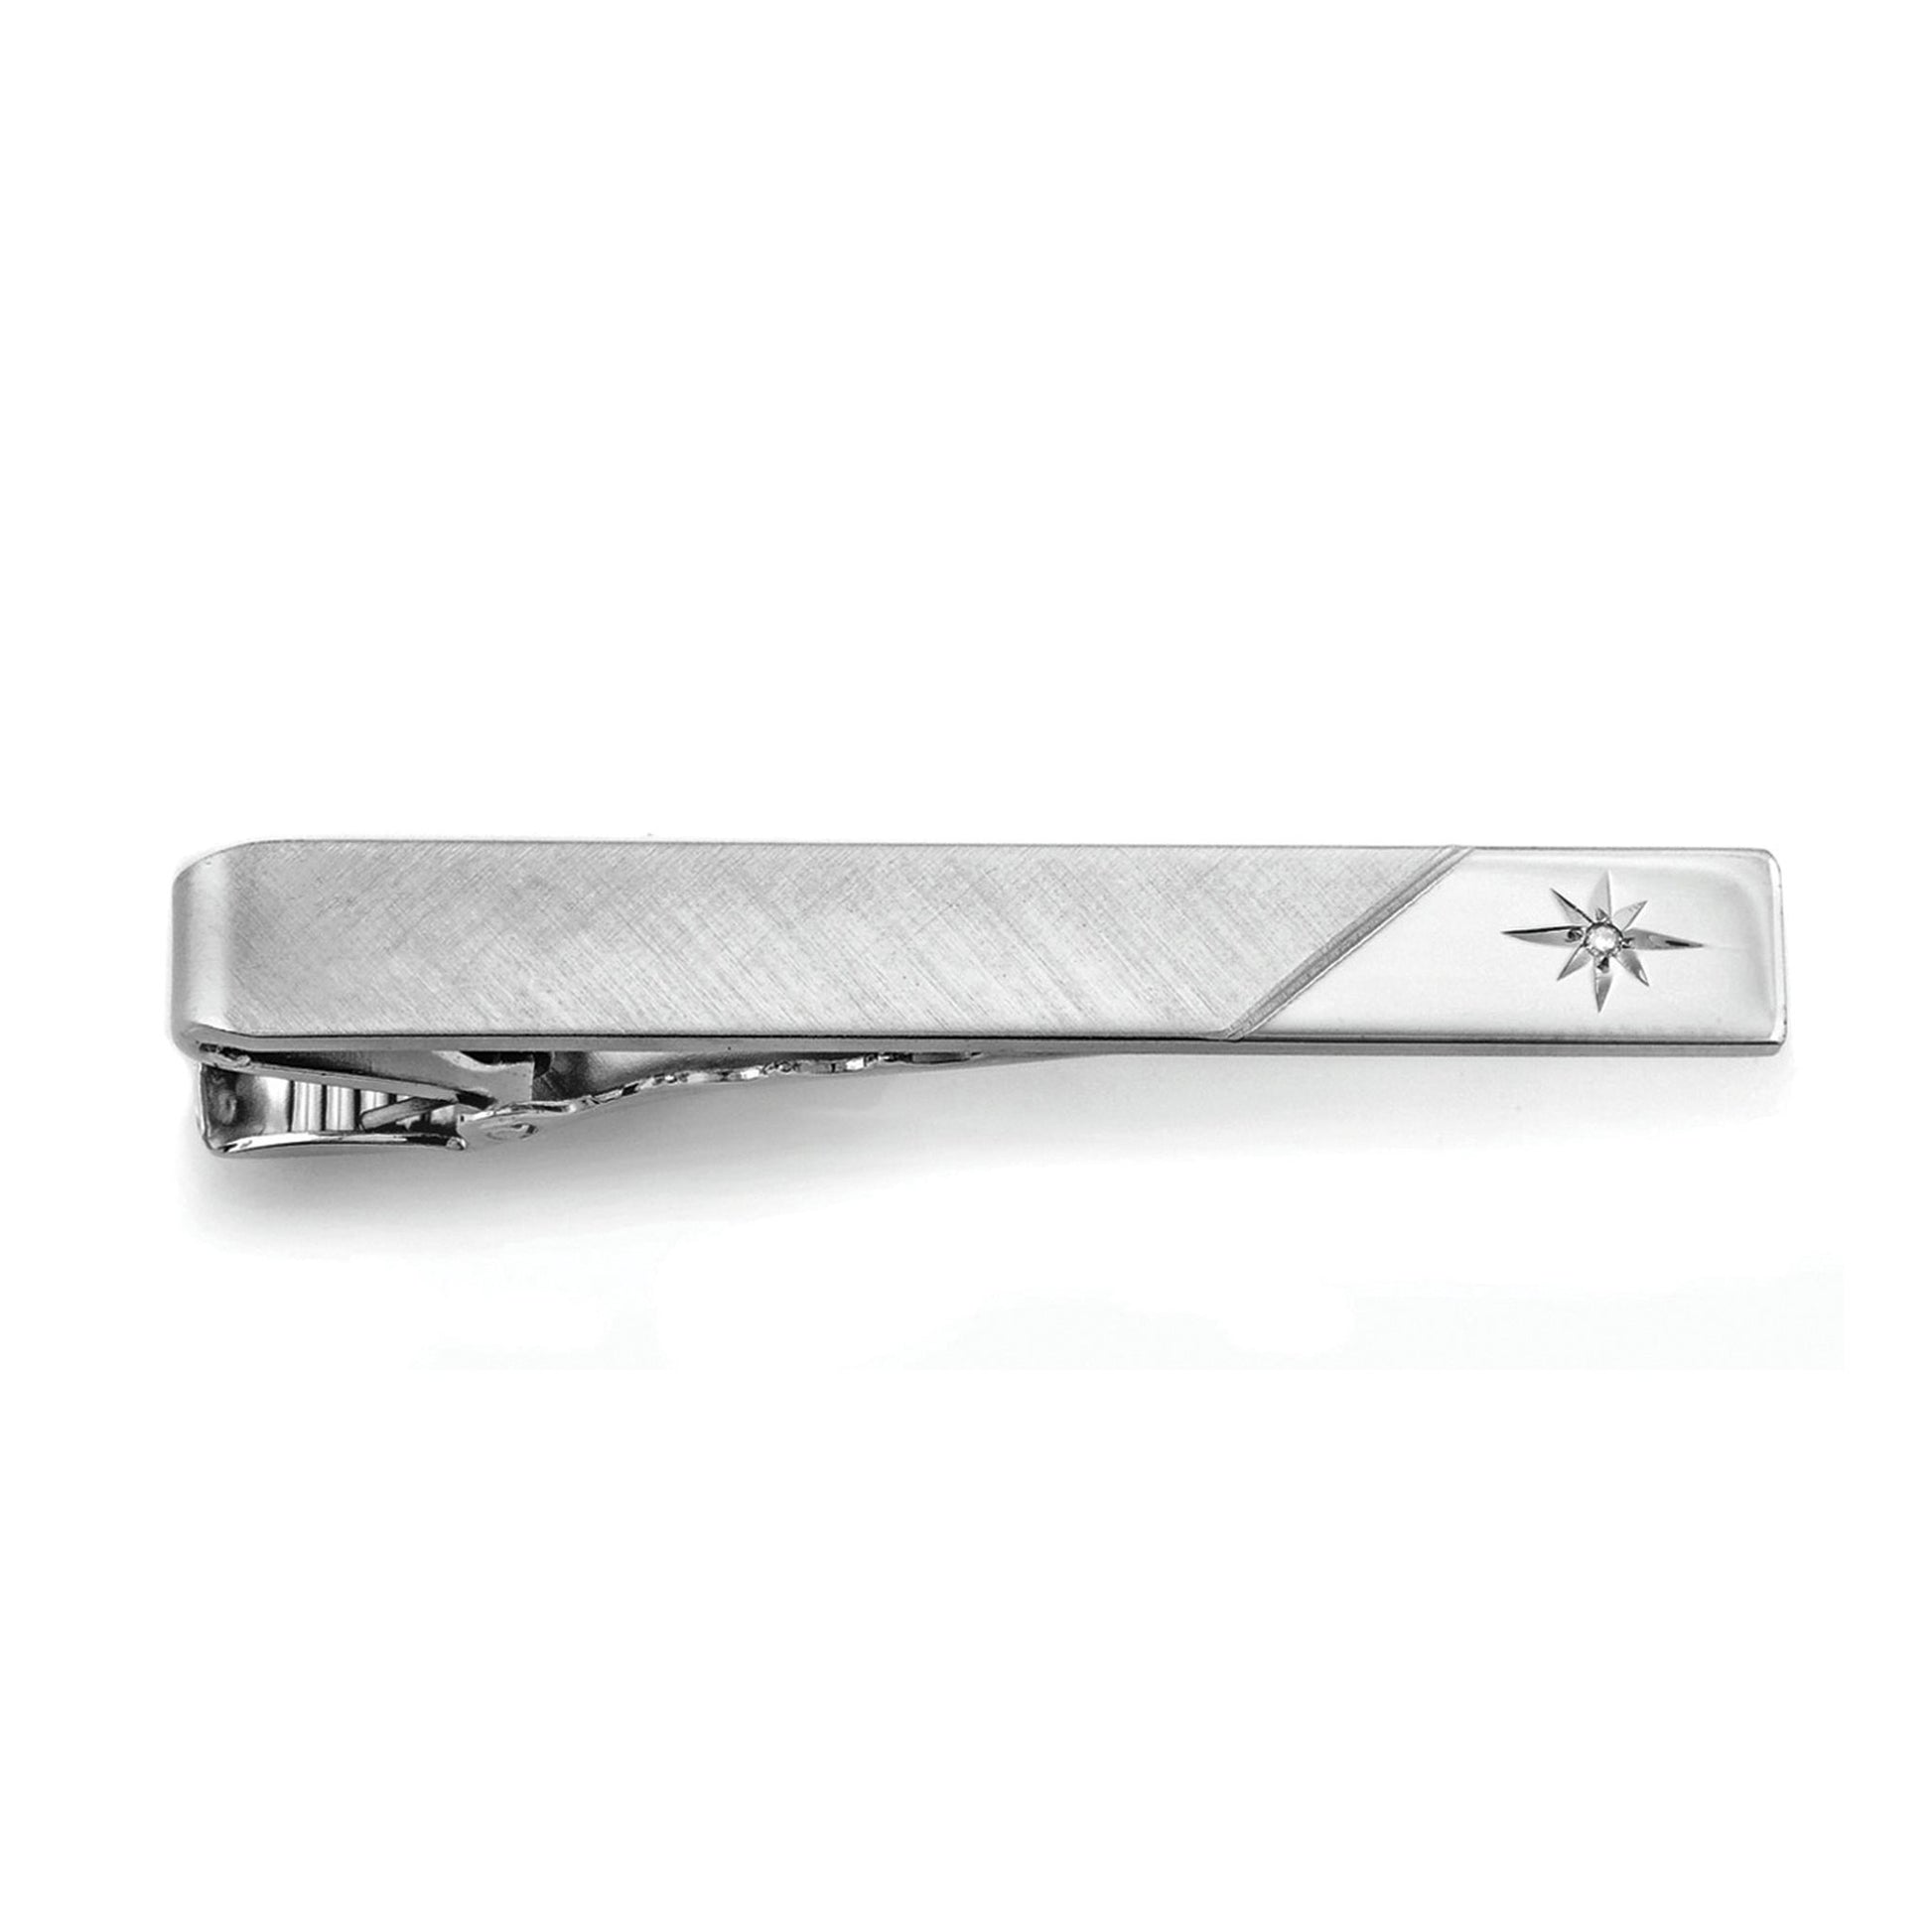 A florentined two tone tie bar with diamond displayed on a neutral white background.